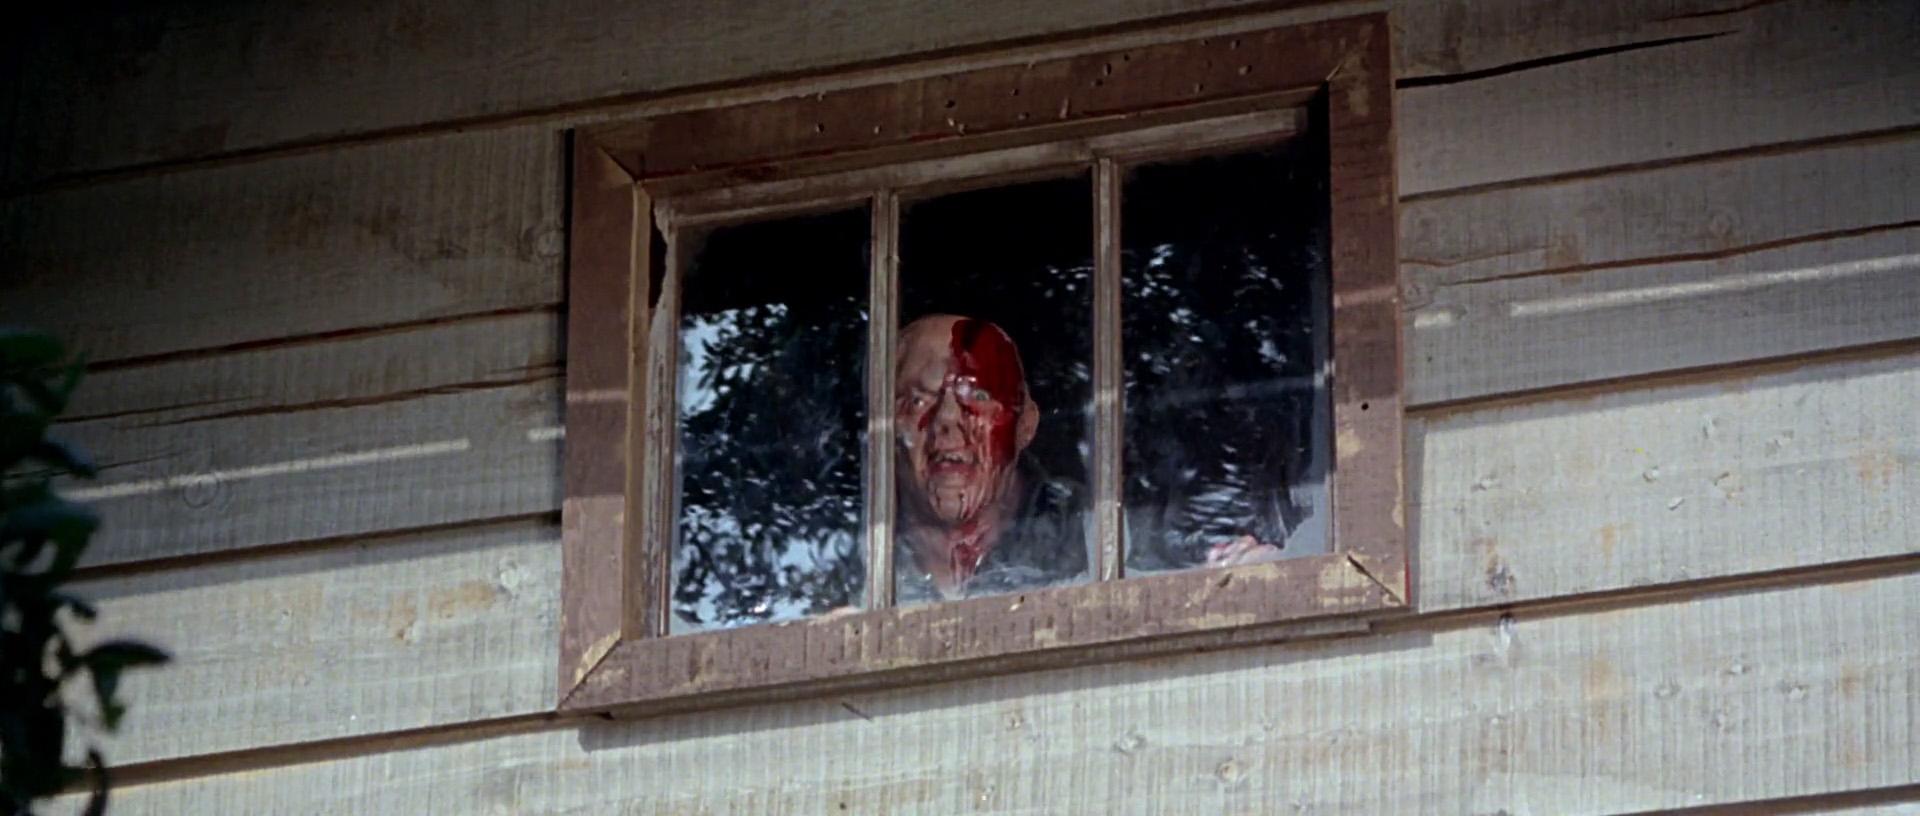 Richard Brooker in Friday the 13th Part III (1982)